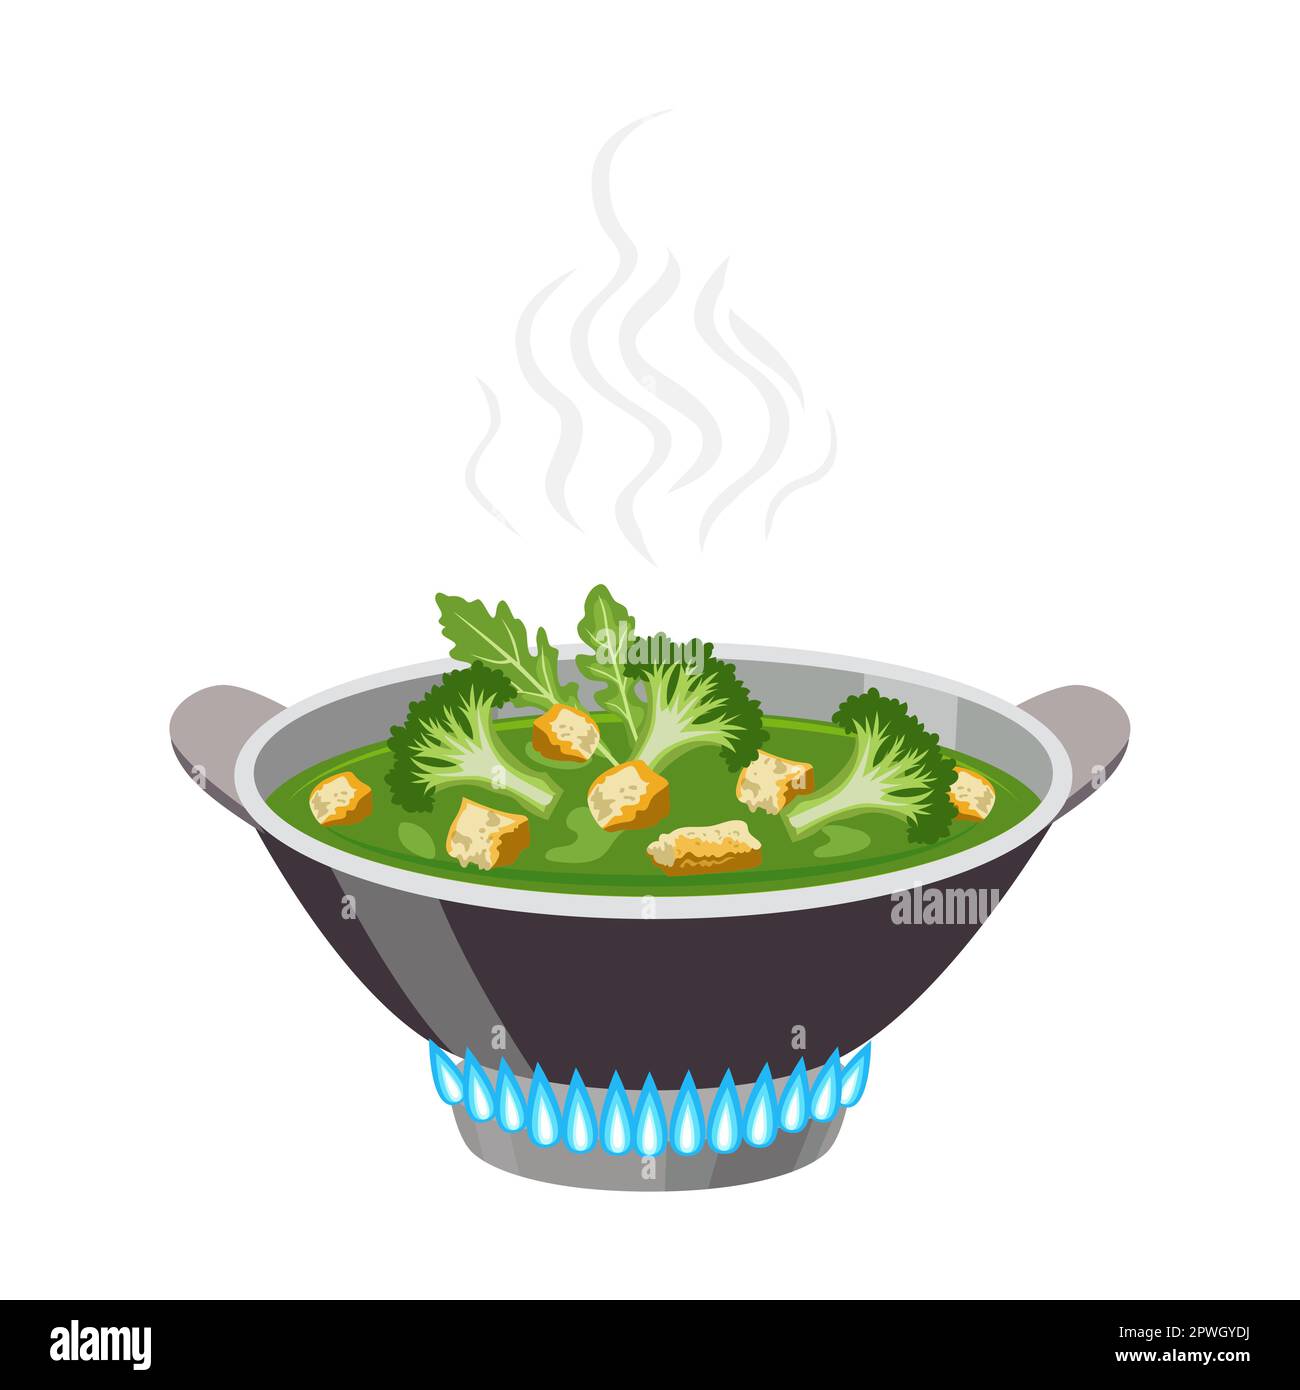 https://c8.alamy.com/comp/2PWGYDJ/cooking-pot-and-pan-with-stewed-broccoli-on-gas-stove-cartoon-illustration-boiling-water-in-kettle-frying-dishes-on-fire-saucepan-with-hot-soup-2PWGYDJ.jpg